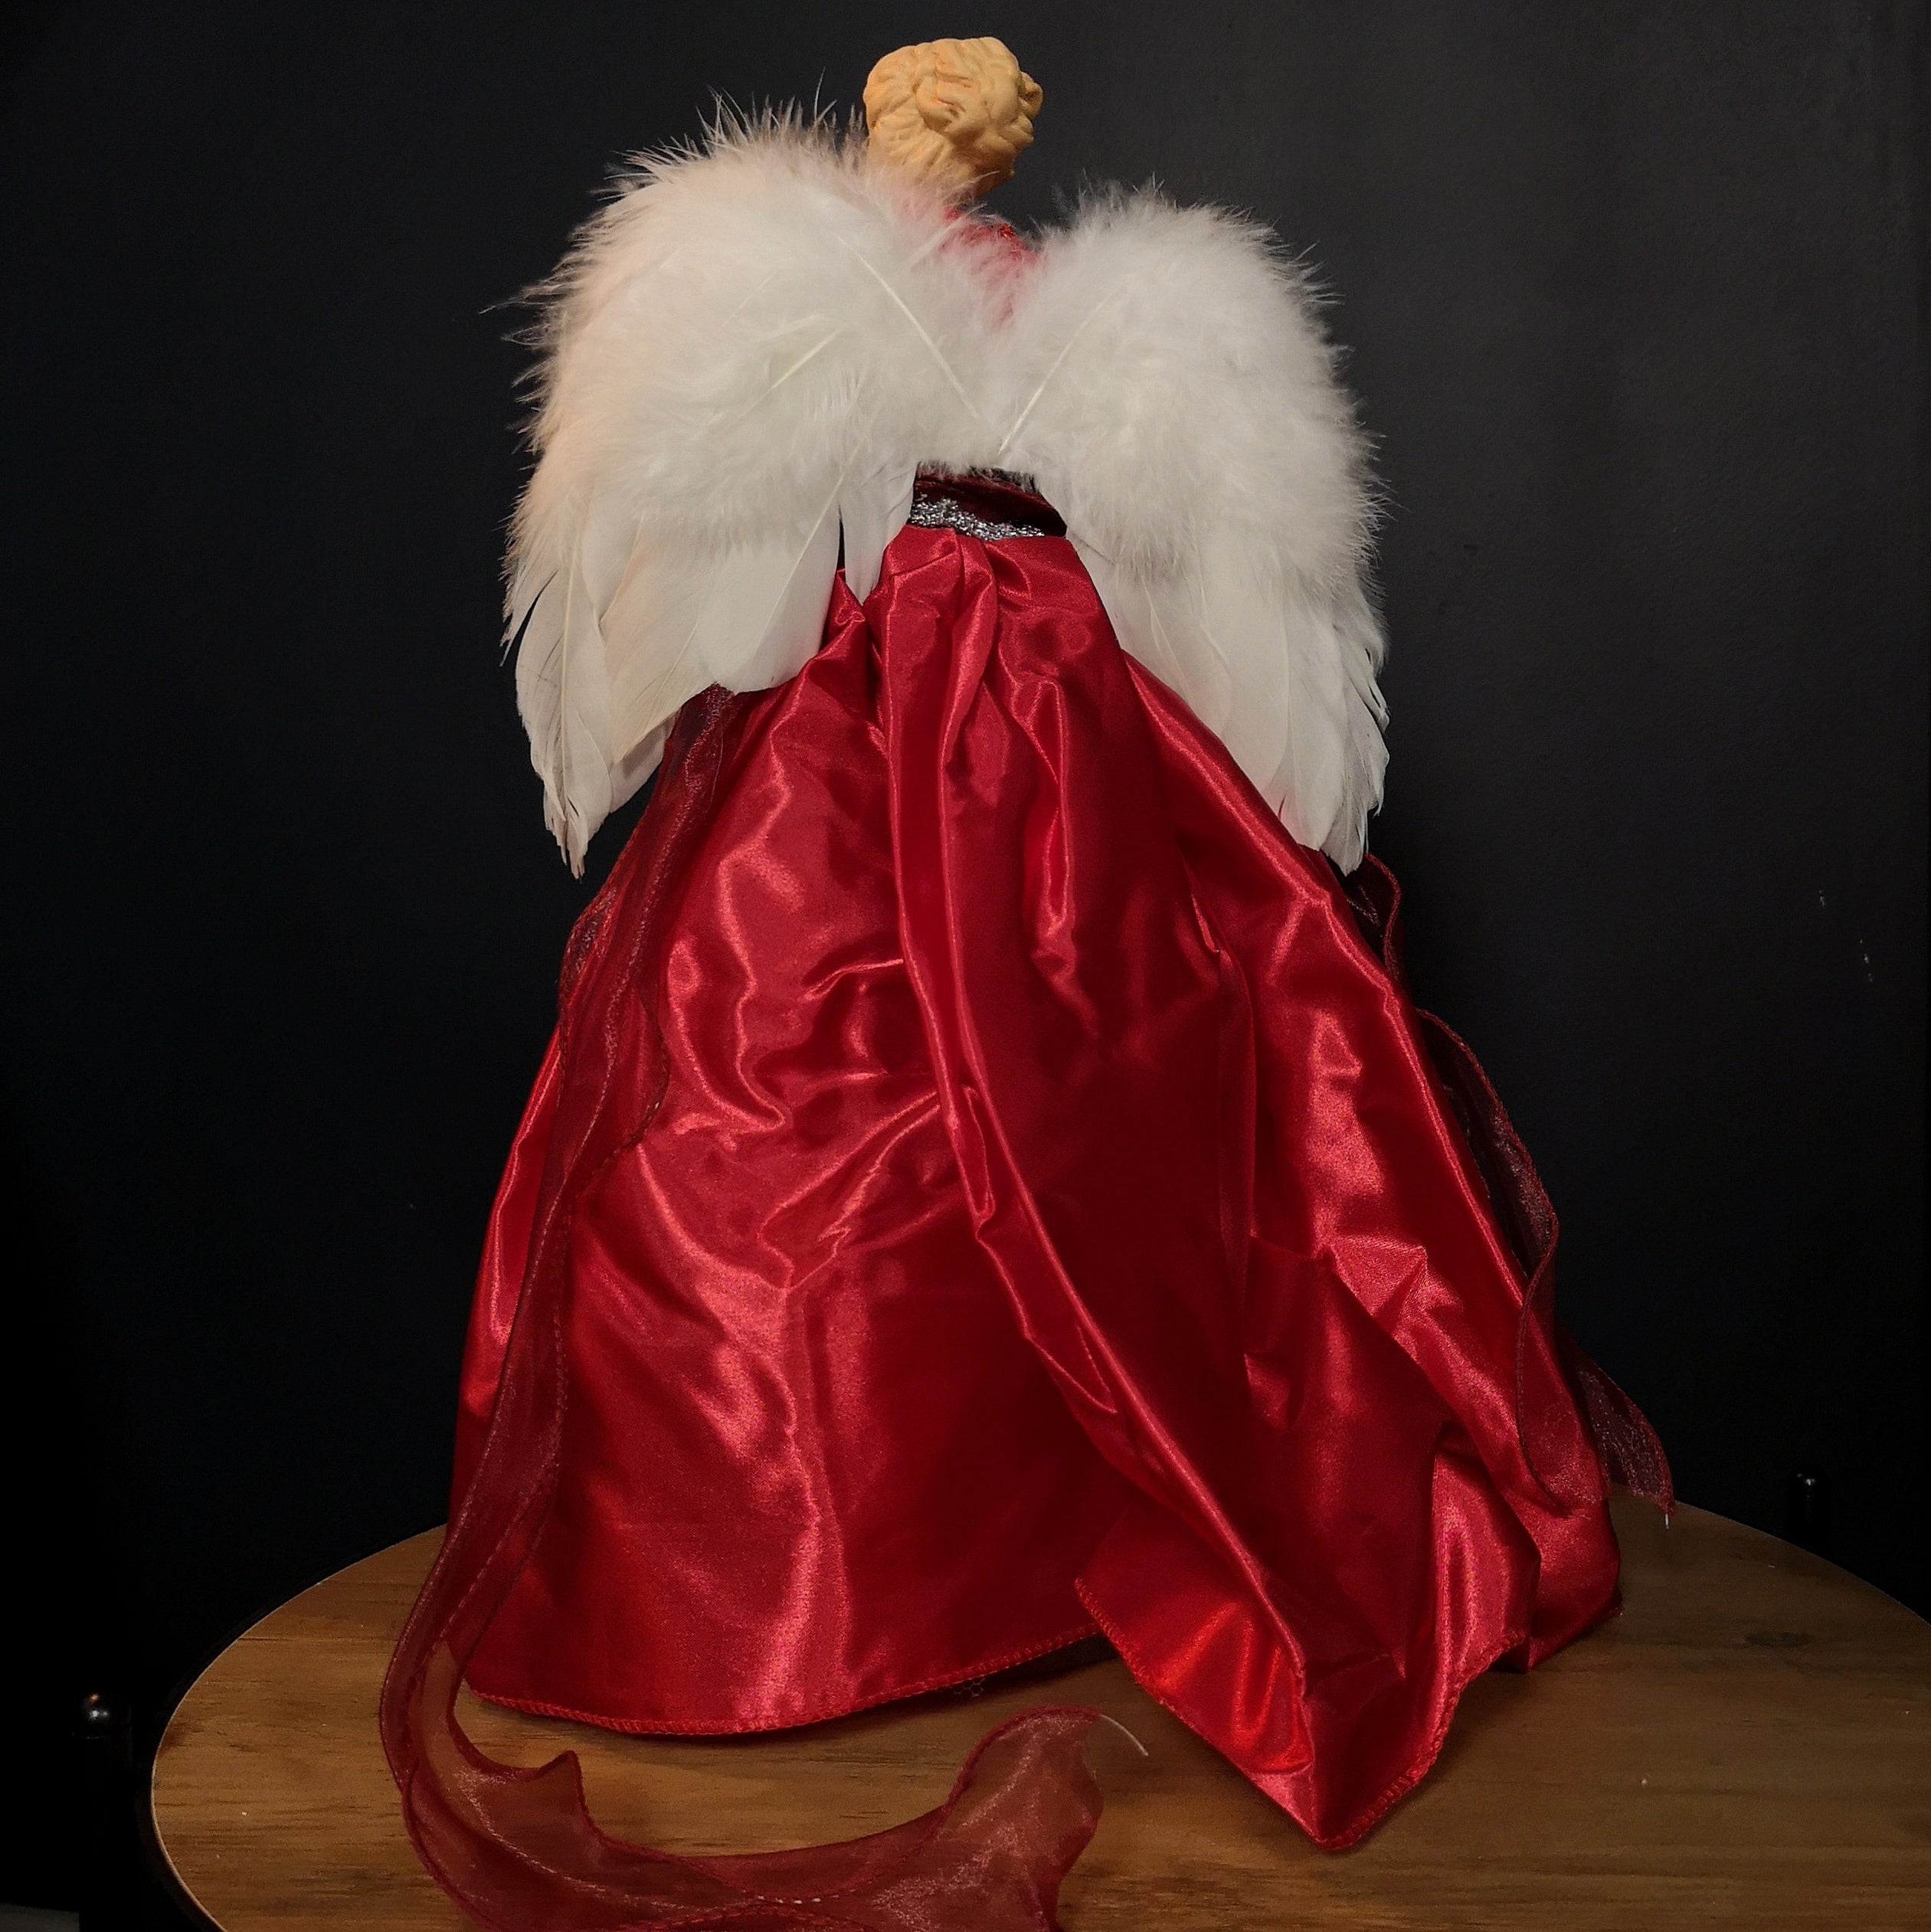 45cm Premier Christmas Angel Tree Topper Decoration in Red and Silver